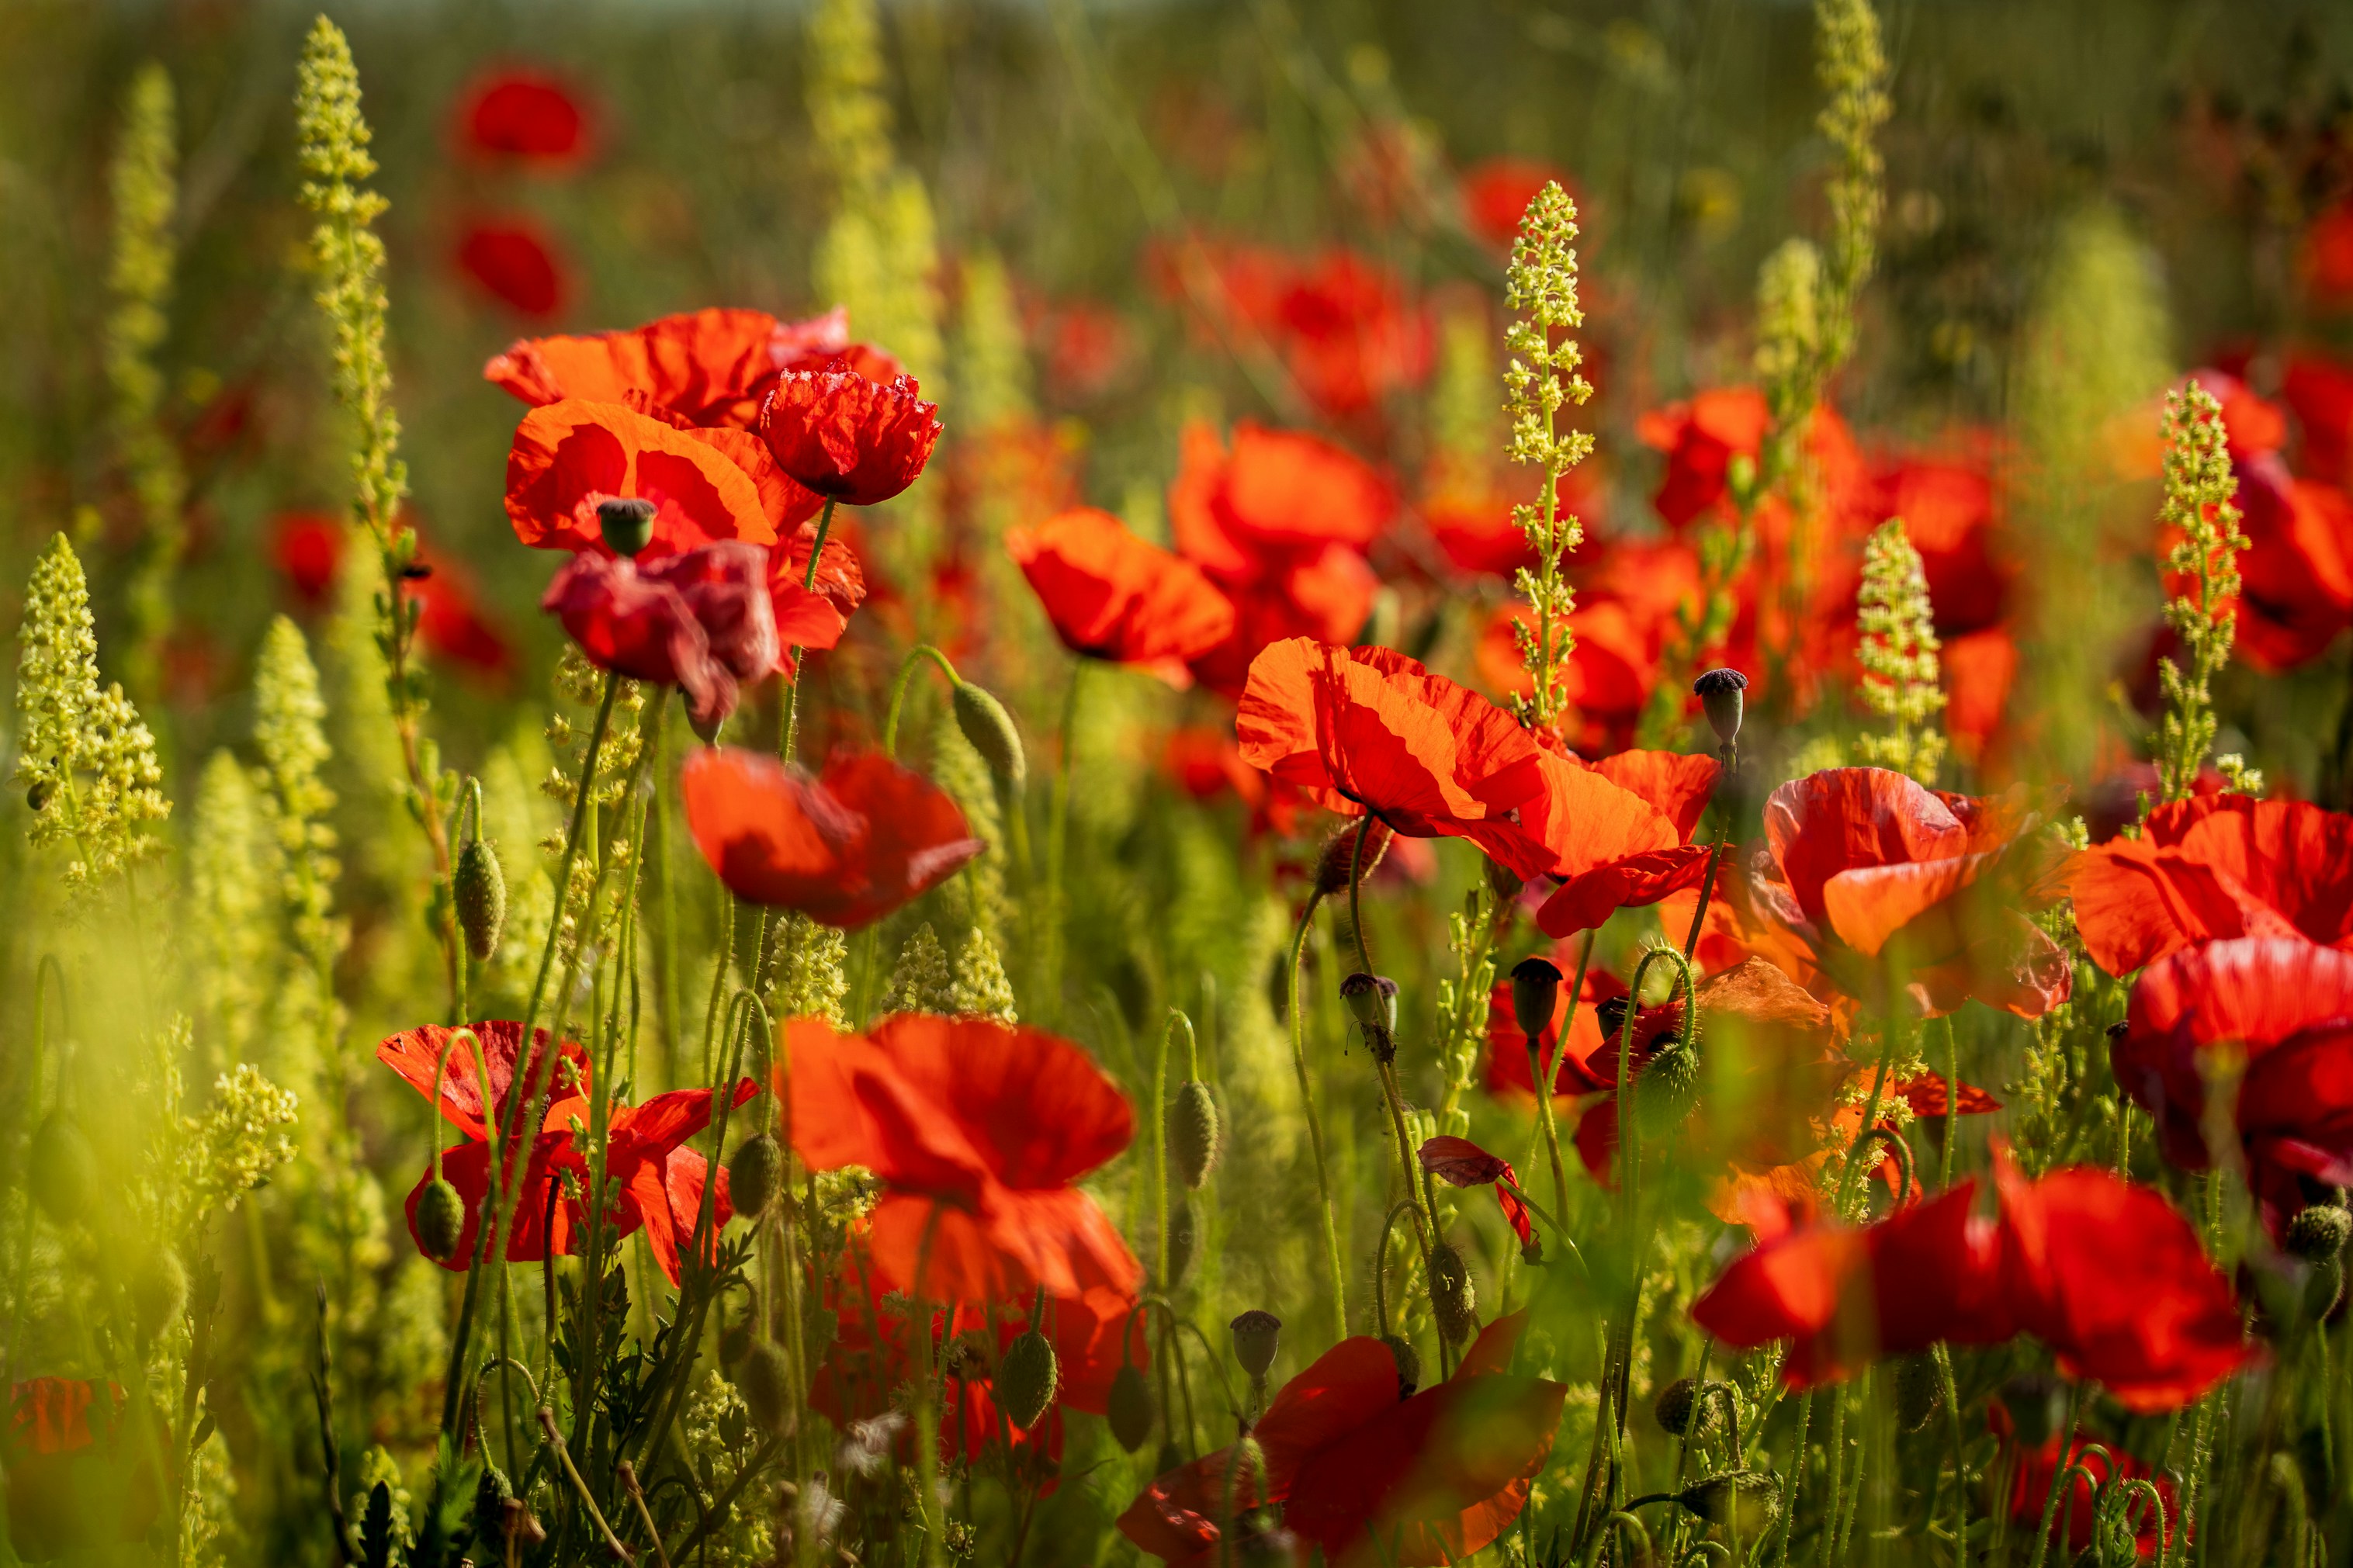 Red poppies, a sign of remembrance, in a field in the countryside.